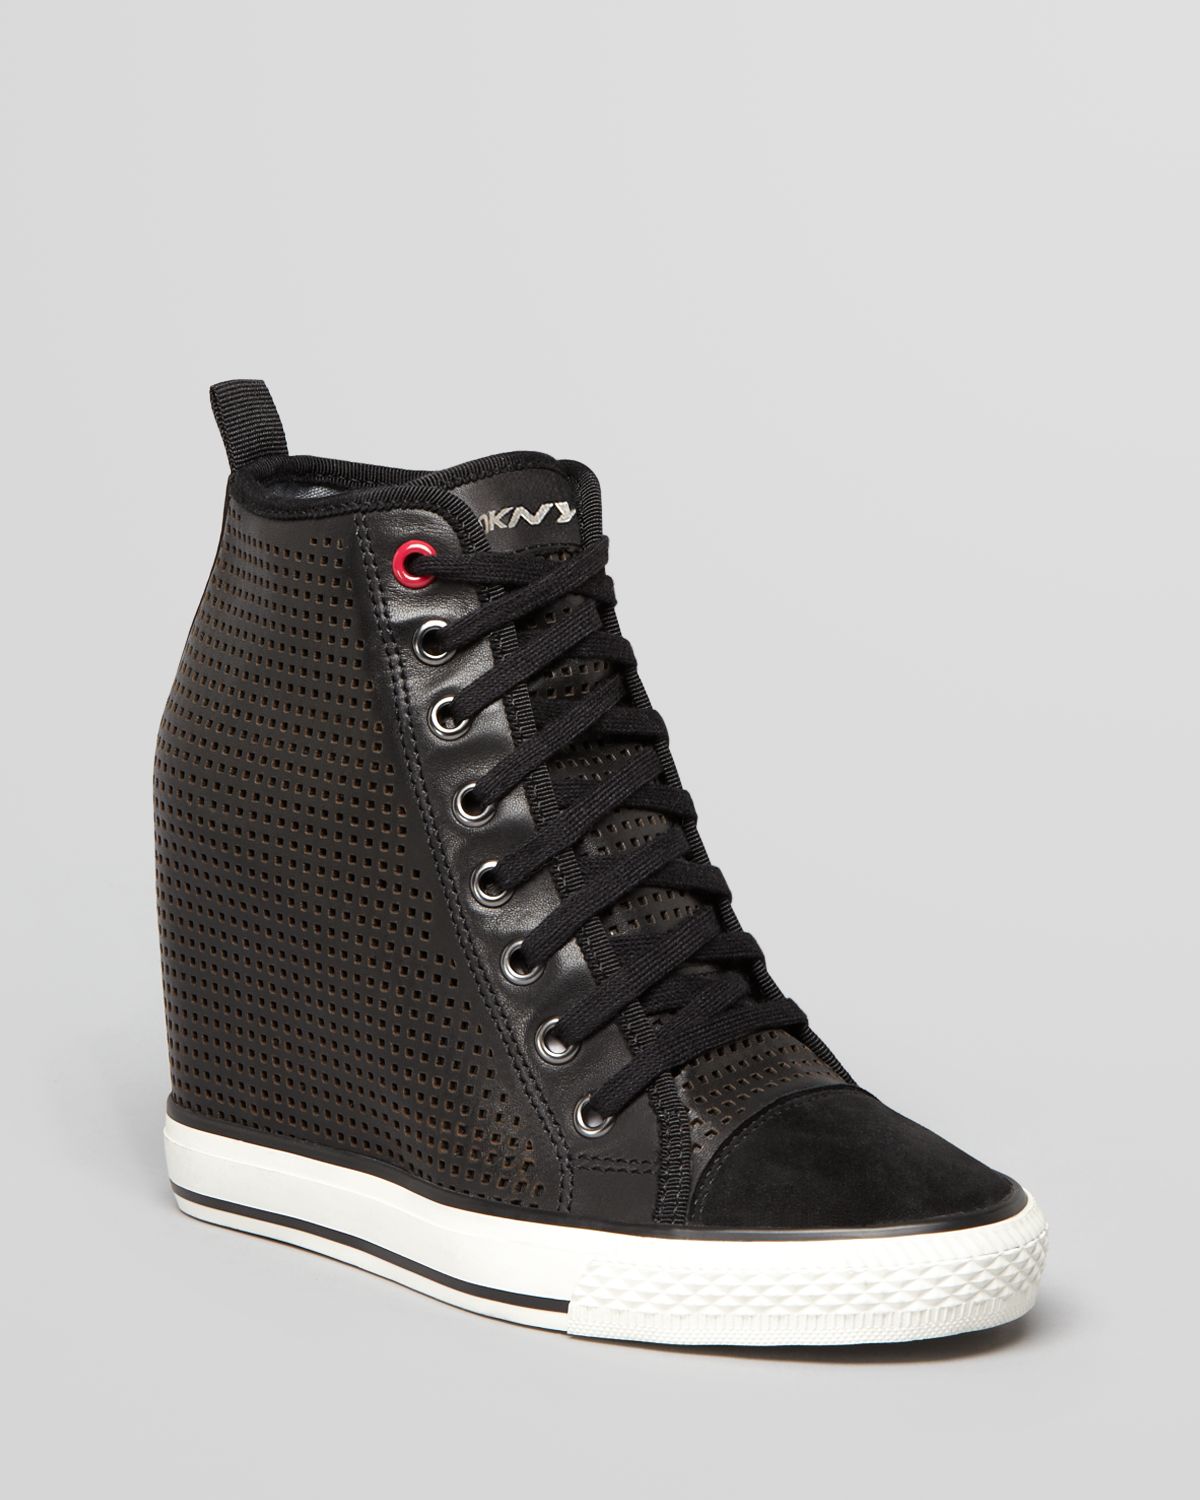 Dkny Lace Up Wedge Sneakers Grommet Perforated in Black | Lyst